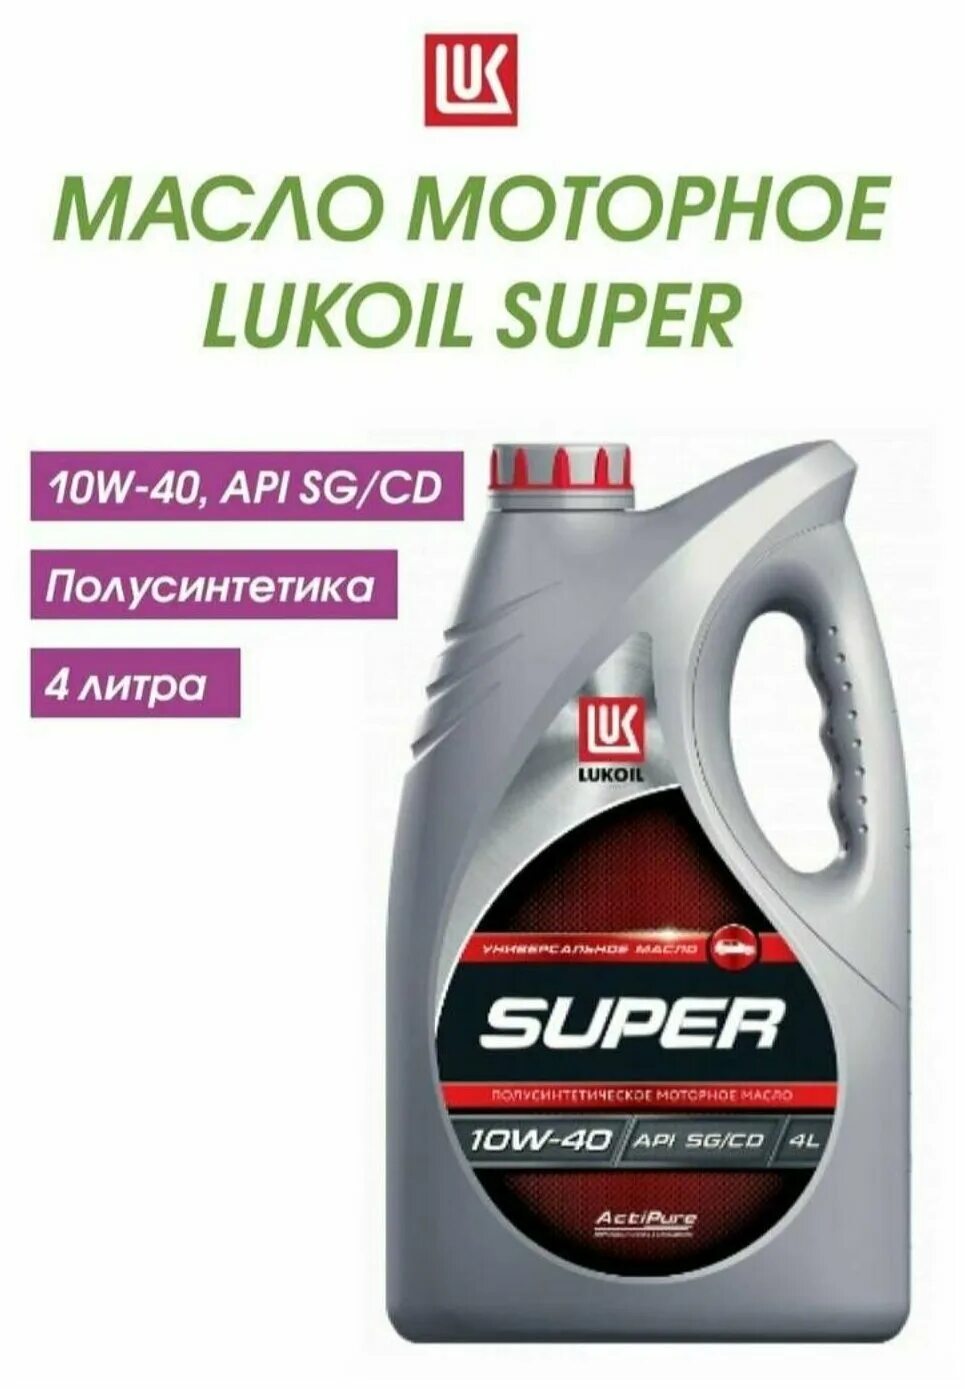 Масло моторное Лукойл 10w-40 super. Lukoil super 5w-40. Моторное масло Лукойл (Lukoil) 5w-40 полусинтетическое 4 л. Масло Лукойл супер 10w 40 полусинтетика.